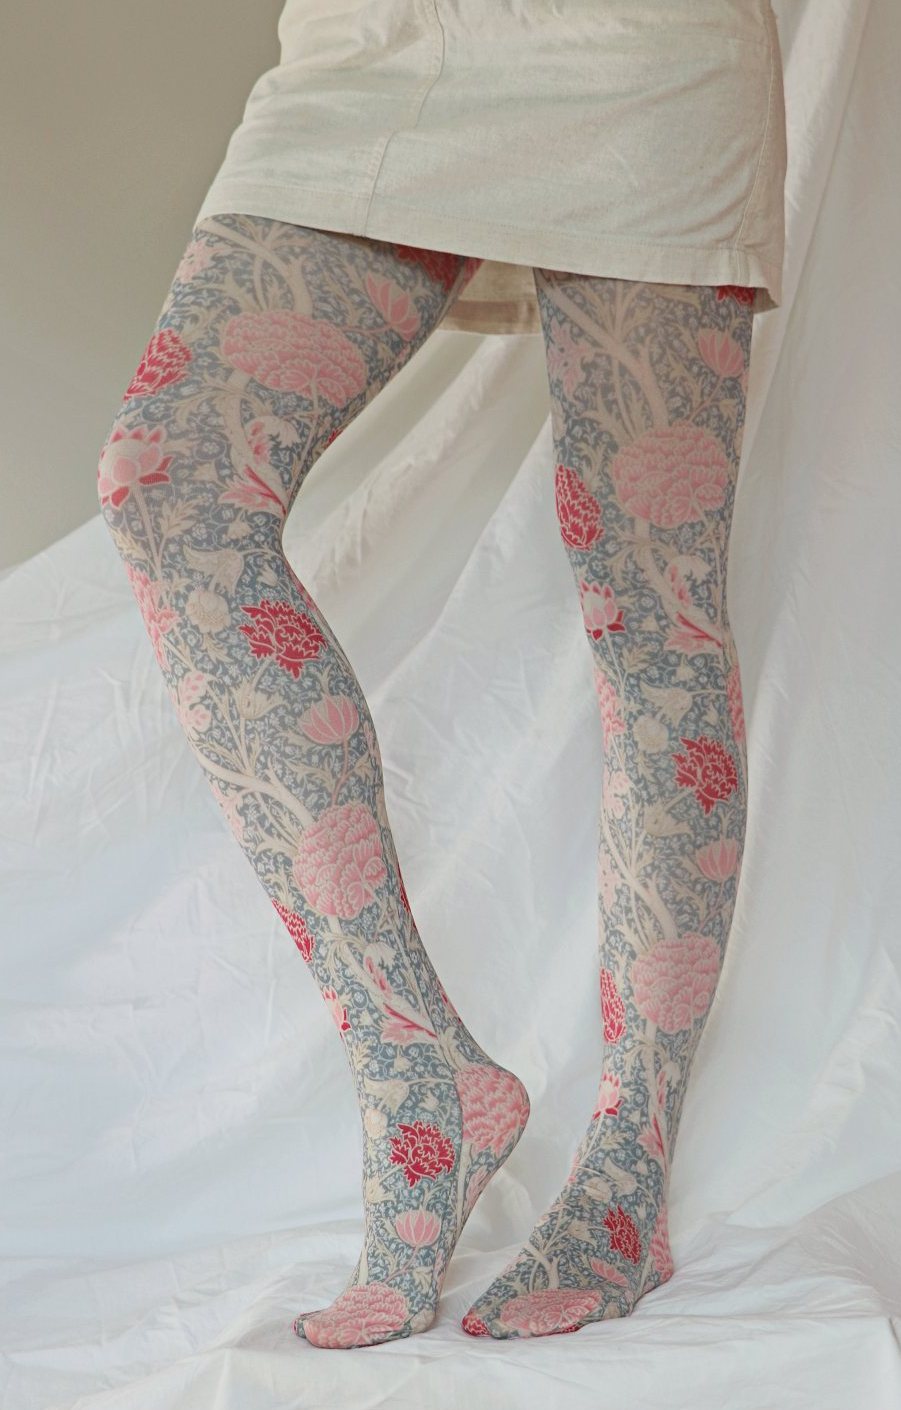 Cray tights from the William Morris collection of the TABBISOCKS brand, with an overall design of red and pink flowers, in an antique-ish Grey color